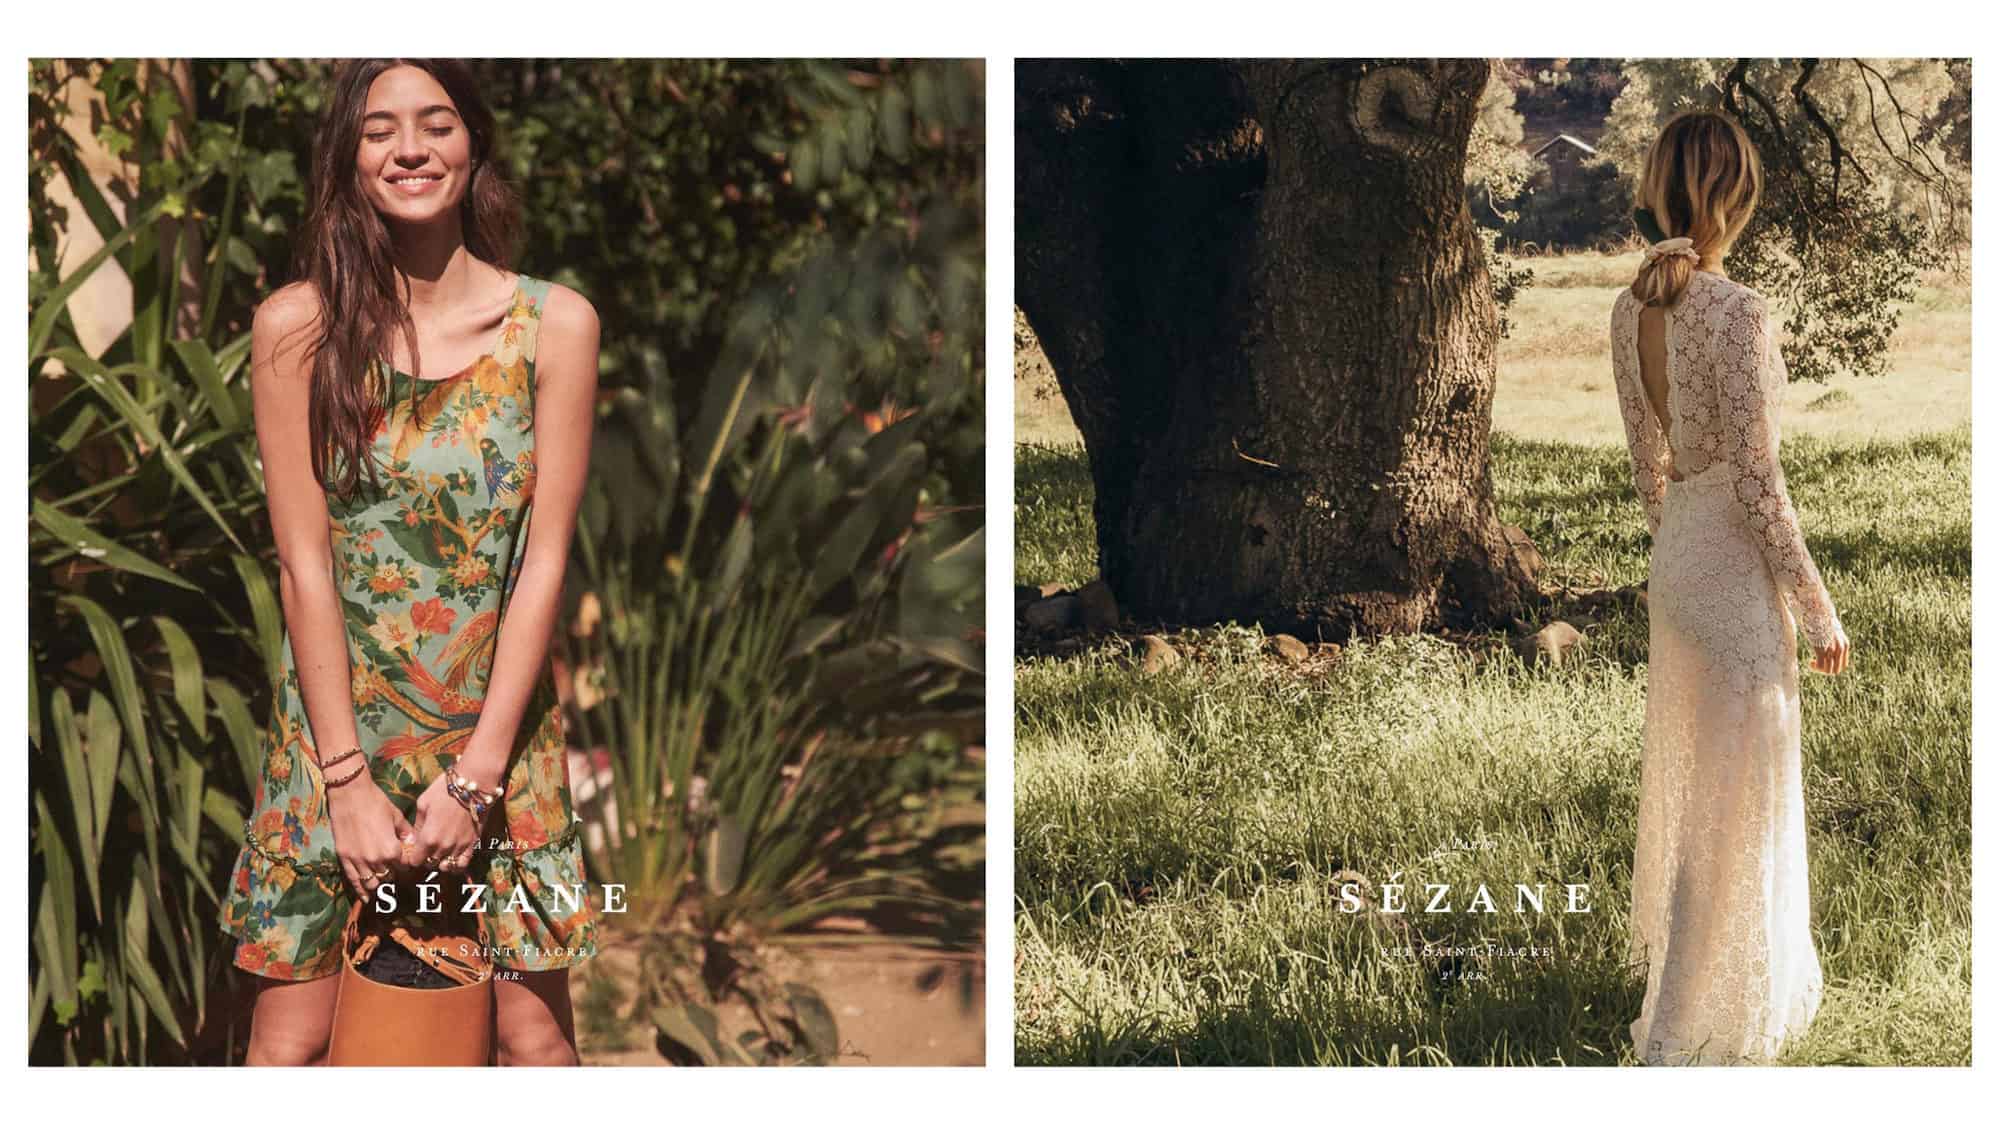 Another go-to brand for Parisians is Sézane, which offers well-cut dresses like this green flowery number for summer (left). Sézane also does wedding dresses like this lacy number worn by a model standing in a field (right).